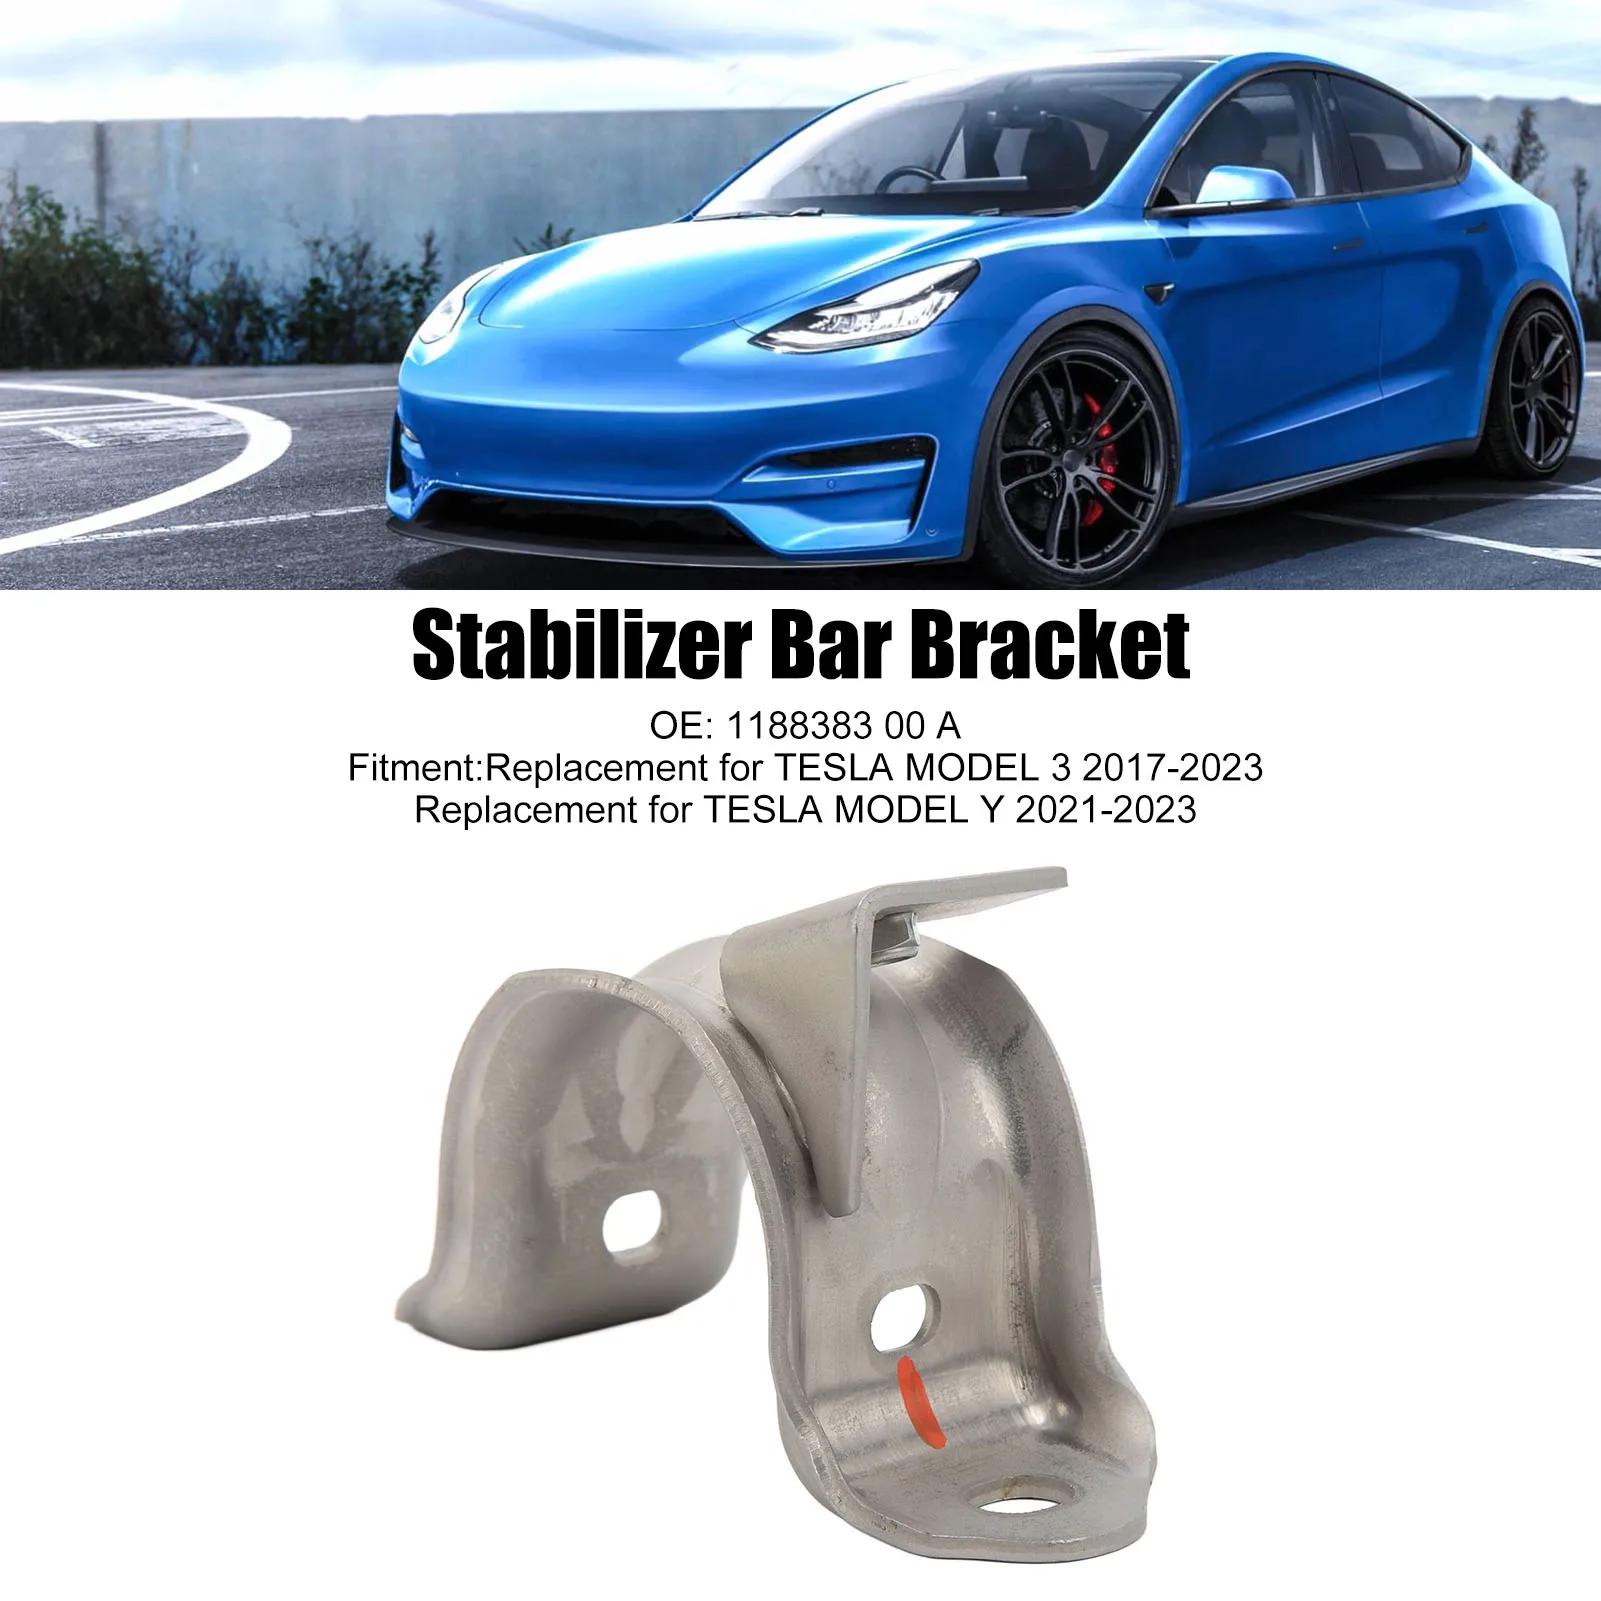 

Front Stabilizer Bar Bracket Anti Deformation 1188383 00 A Replacement For TESLA MODEL 3 Y 2017-2023